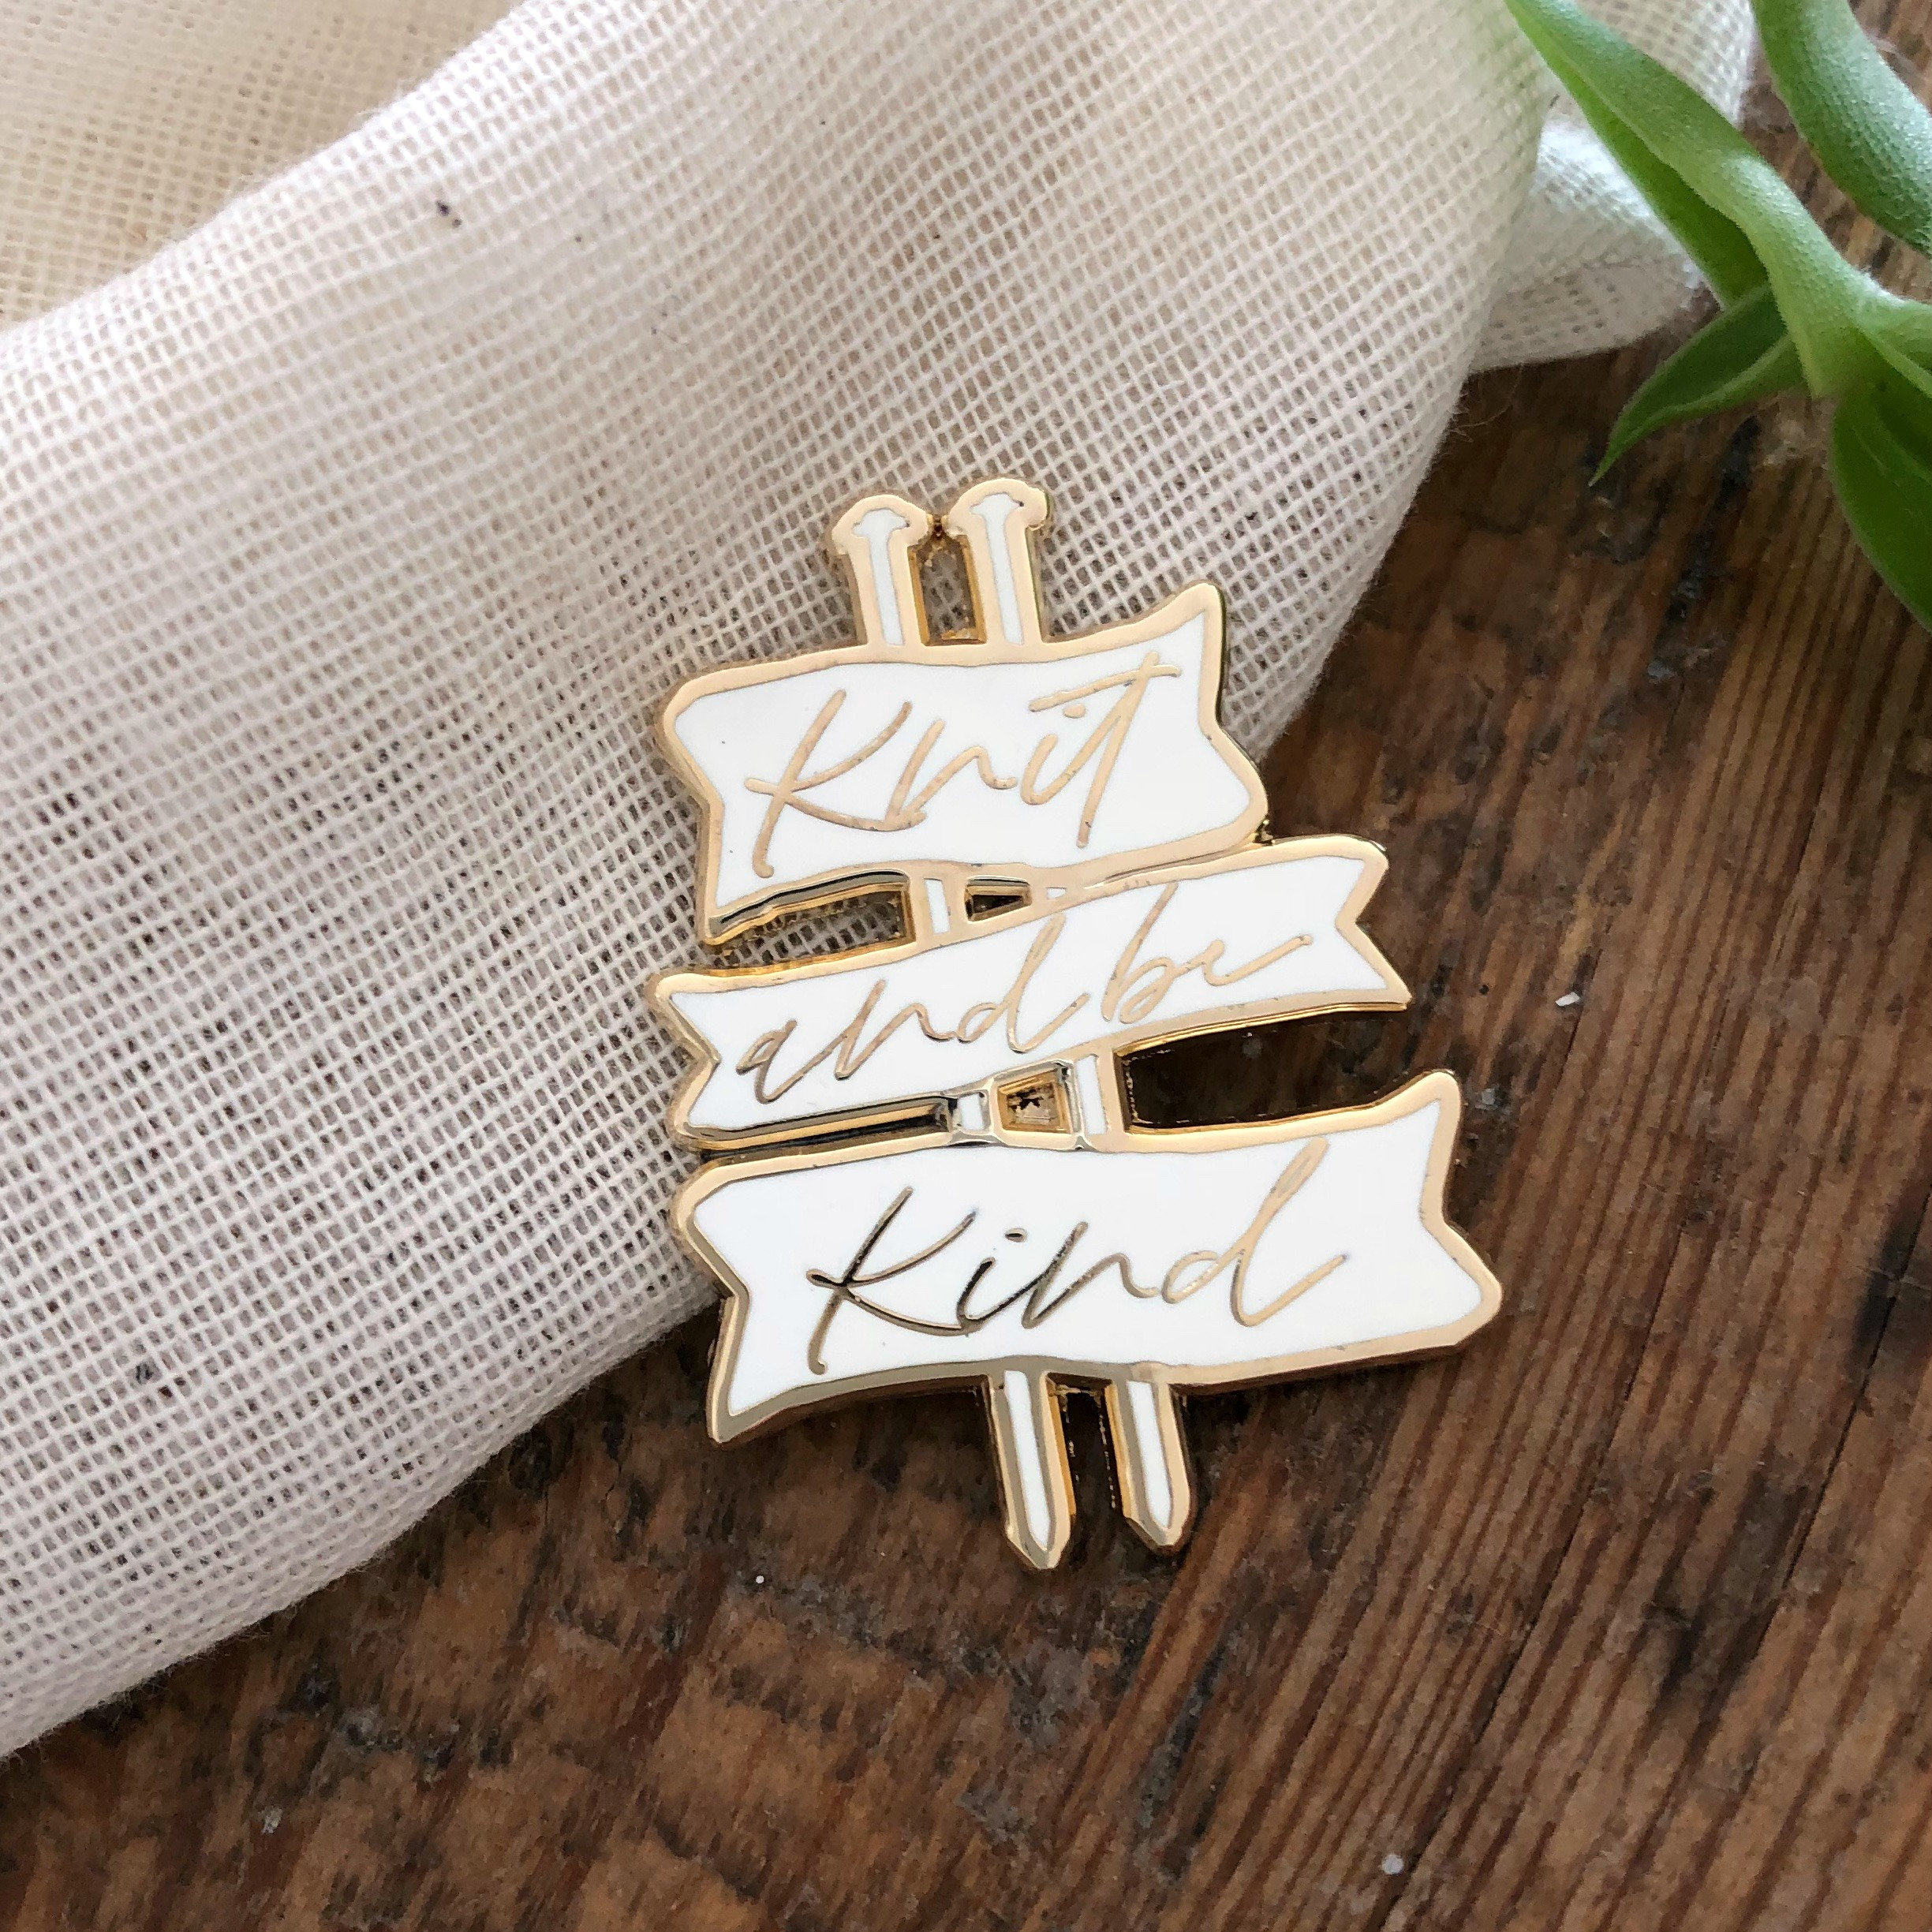 Uplifting Gift White and Gold Pin Knitting Enamel Pin Cute Knitting Gift Knit and be Kind